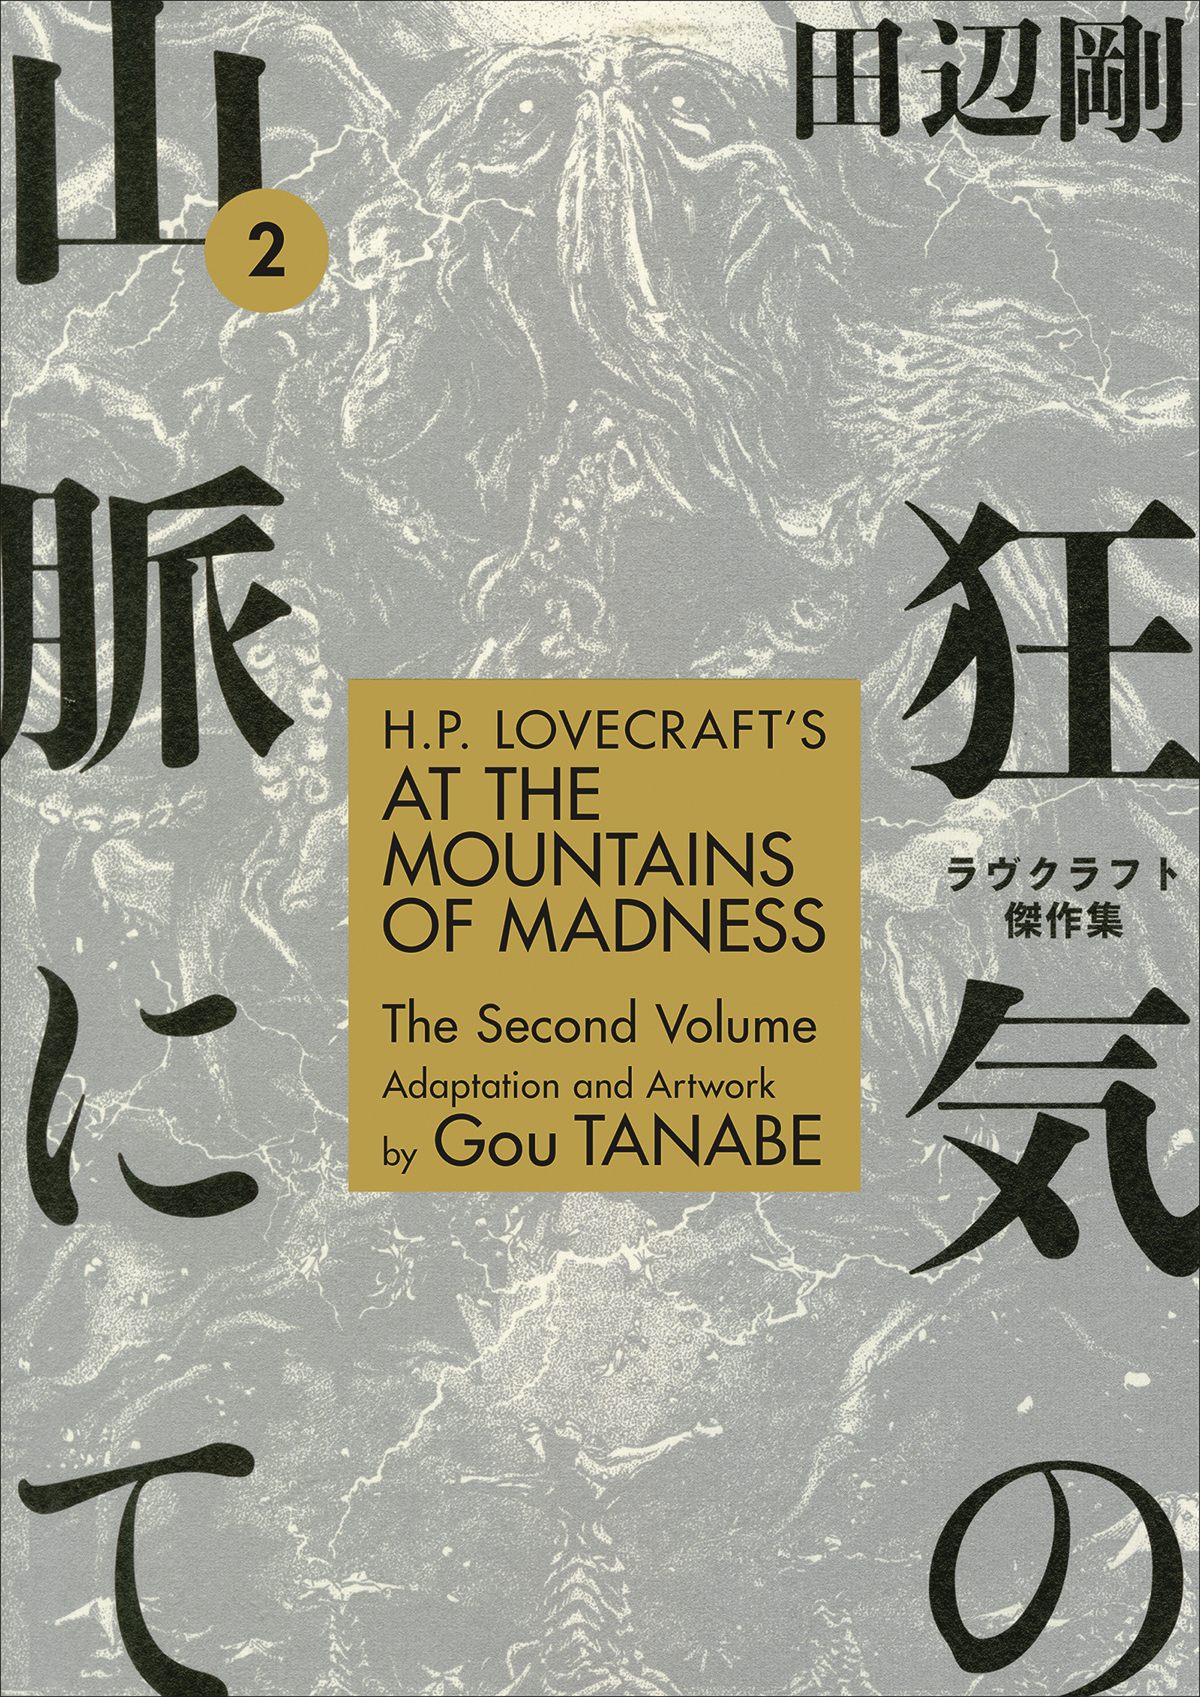 H. P. Lovecraft by Gou Tanabe Manga Volume 2 At Mountains of Madness Volume 2